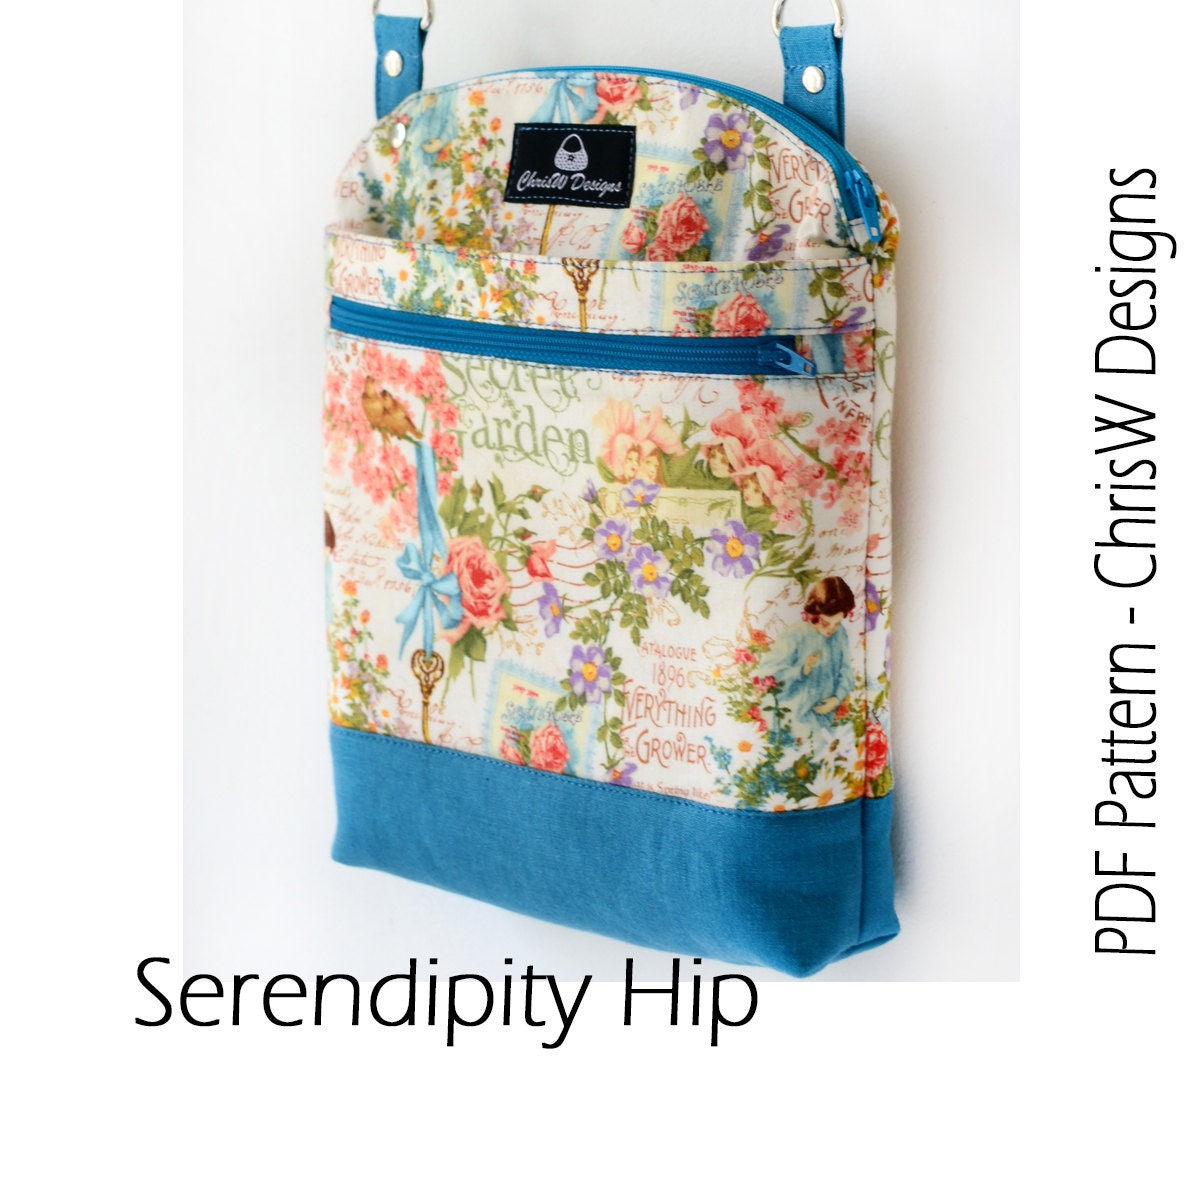 Designer Hipster Cross Body Bag Pattern PDF for sewing your